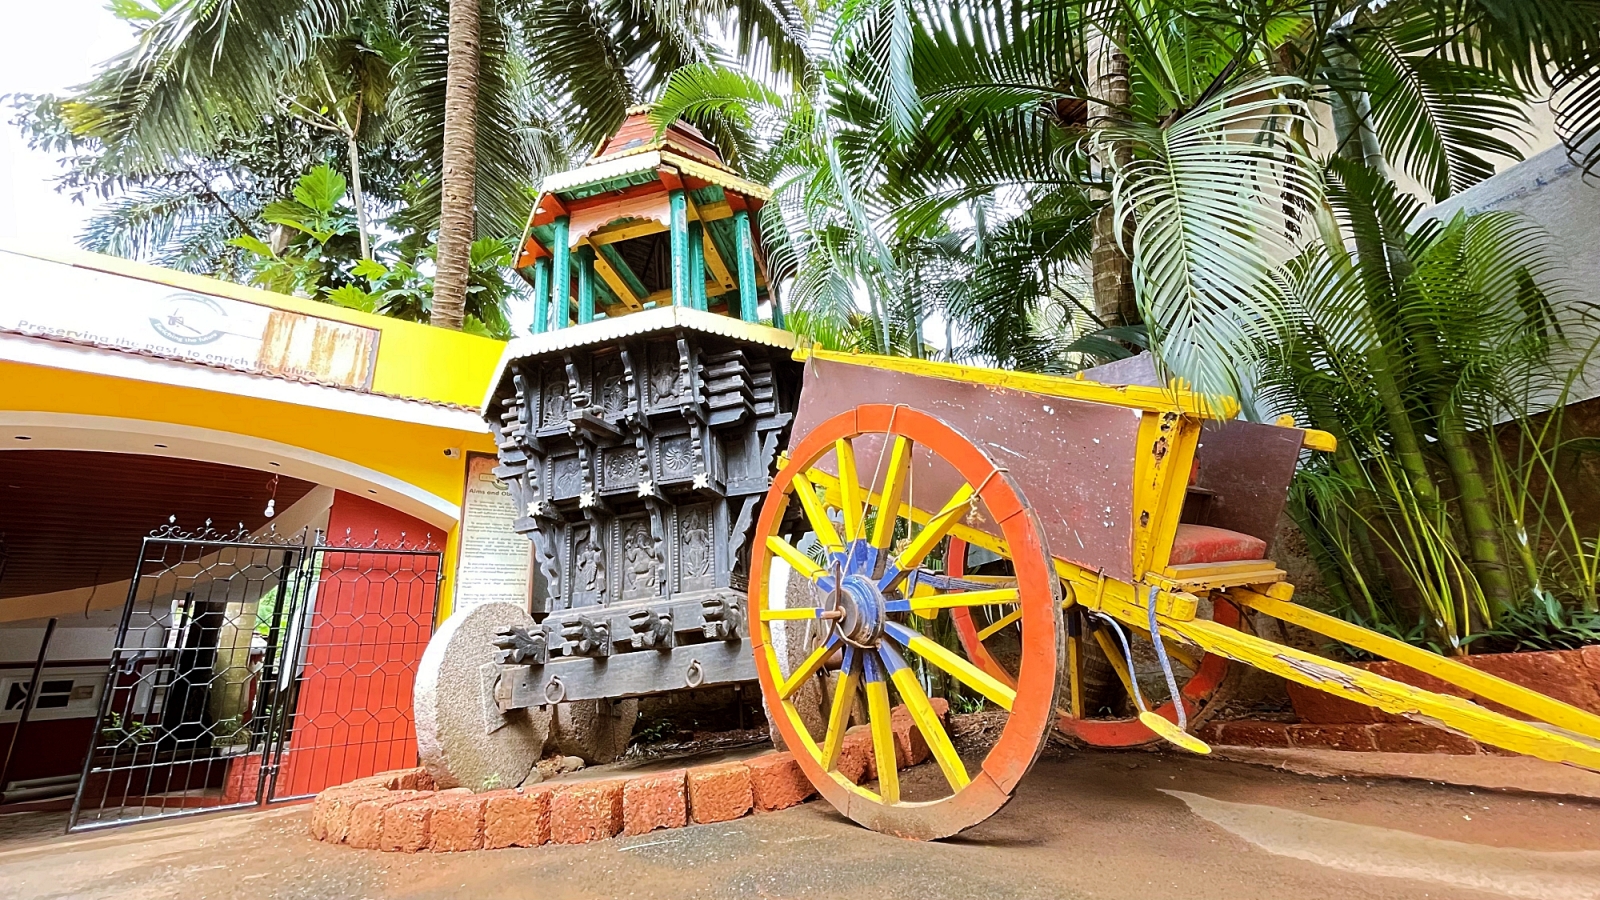 5 Days in Goa: What To See